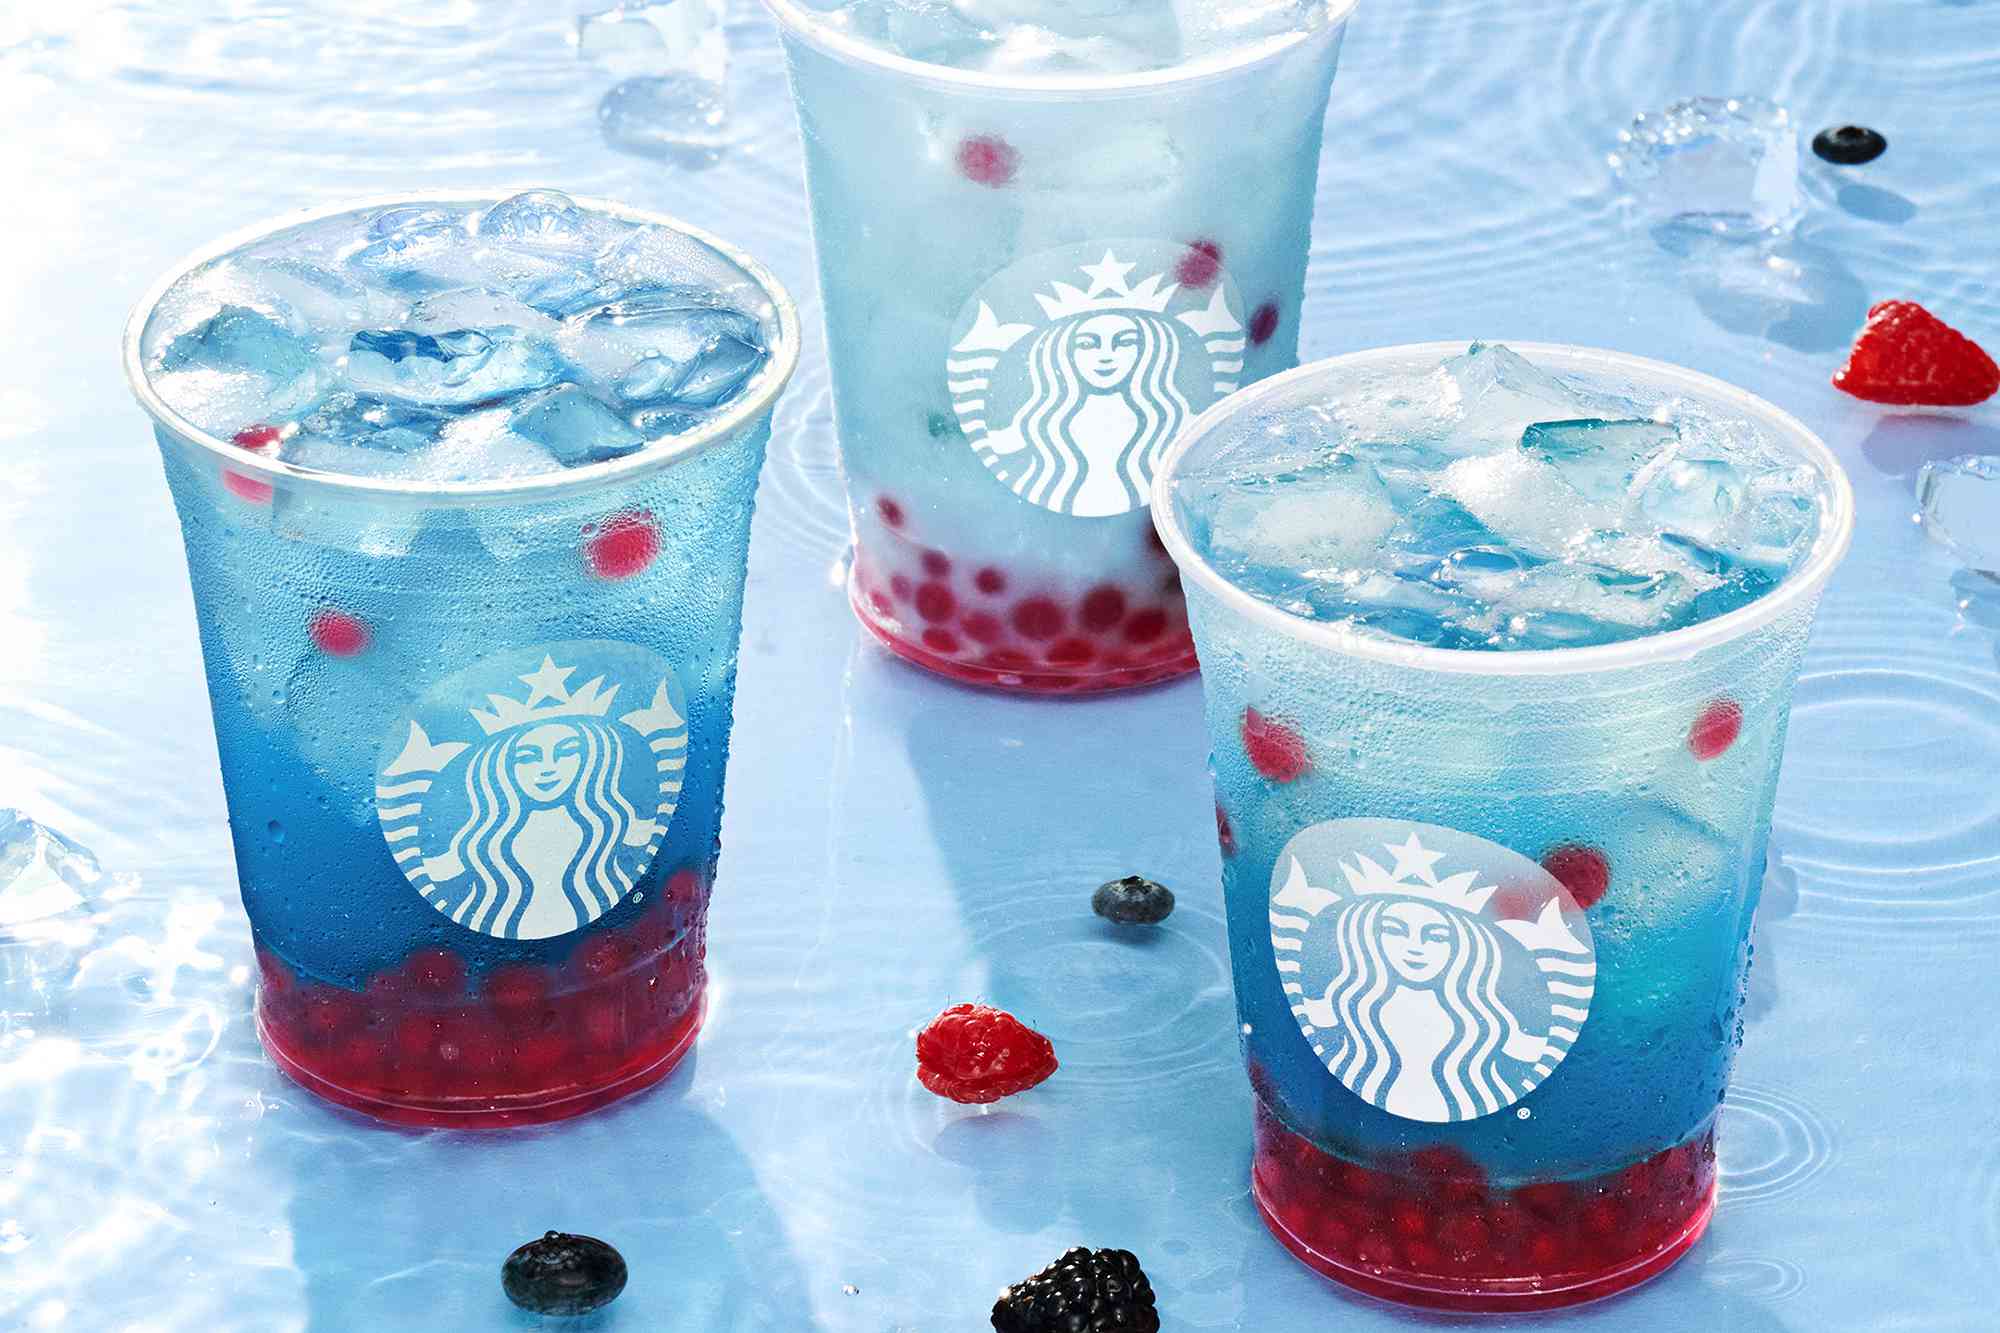 Starbucks Drinks Are Half Off on Fridays for 3 Weeks in May